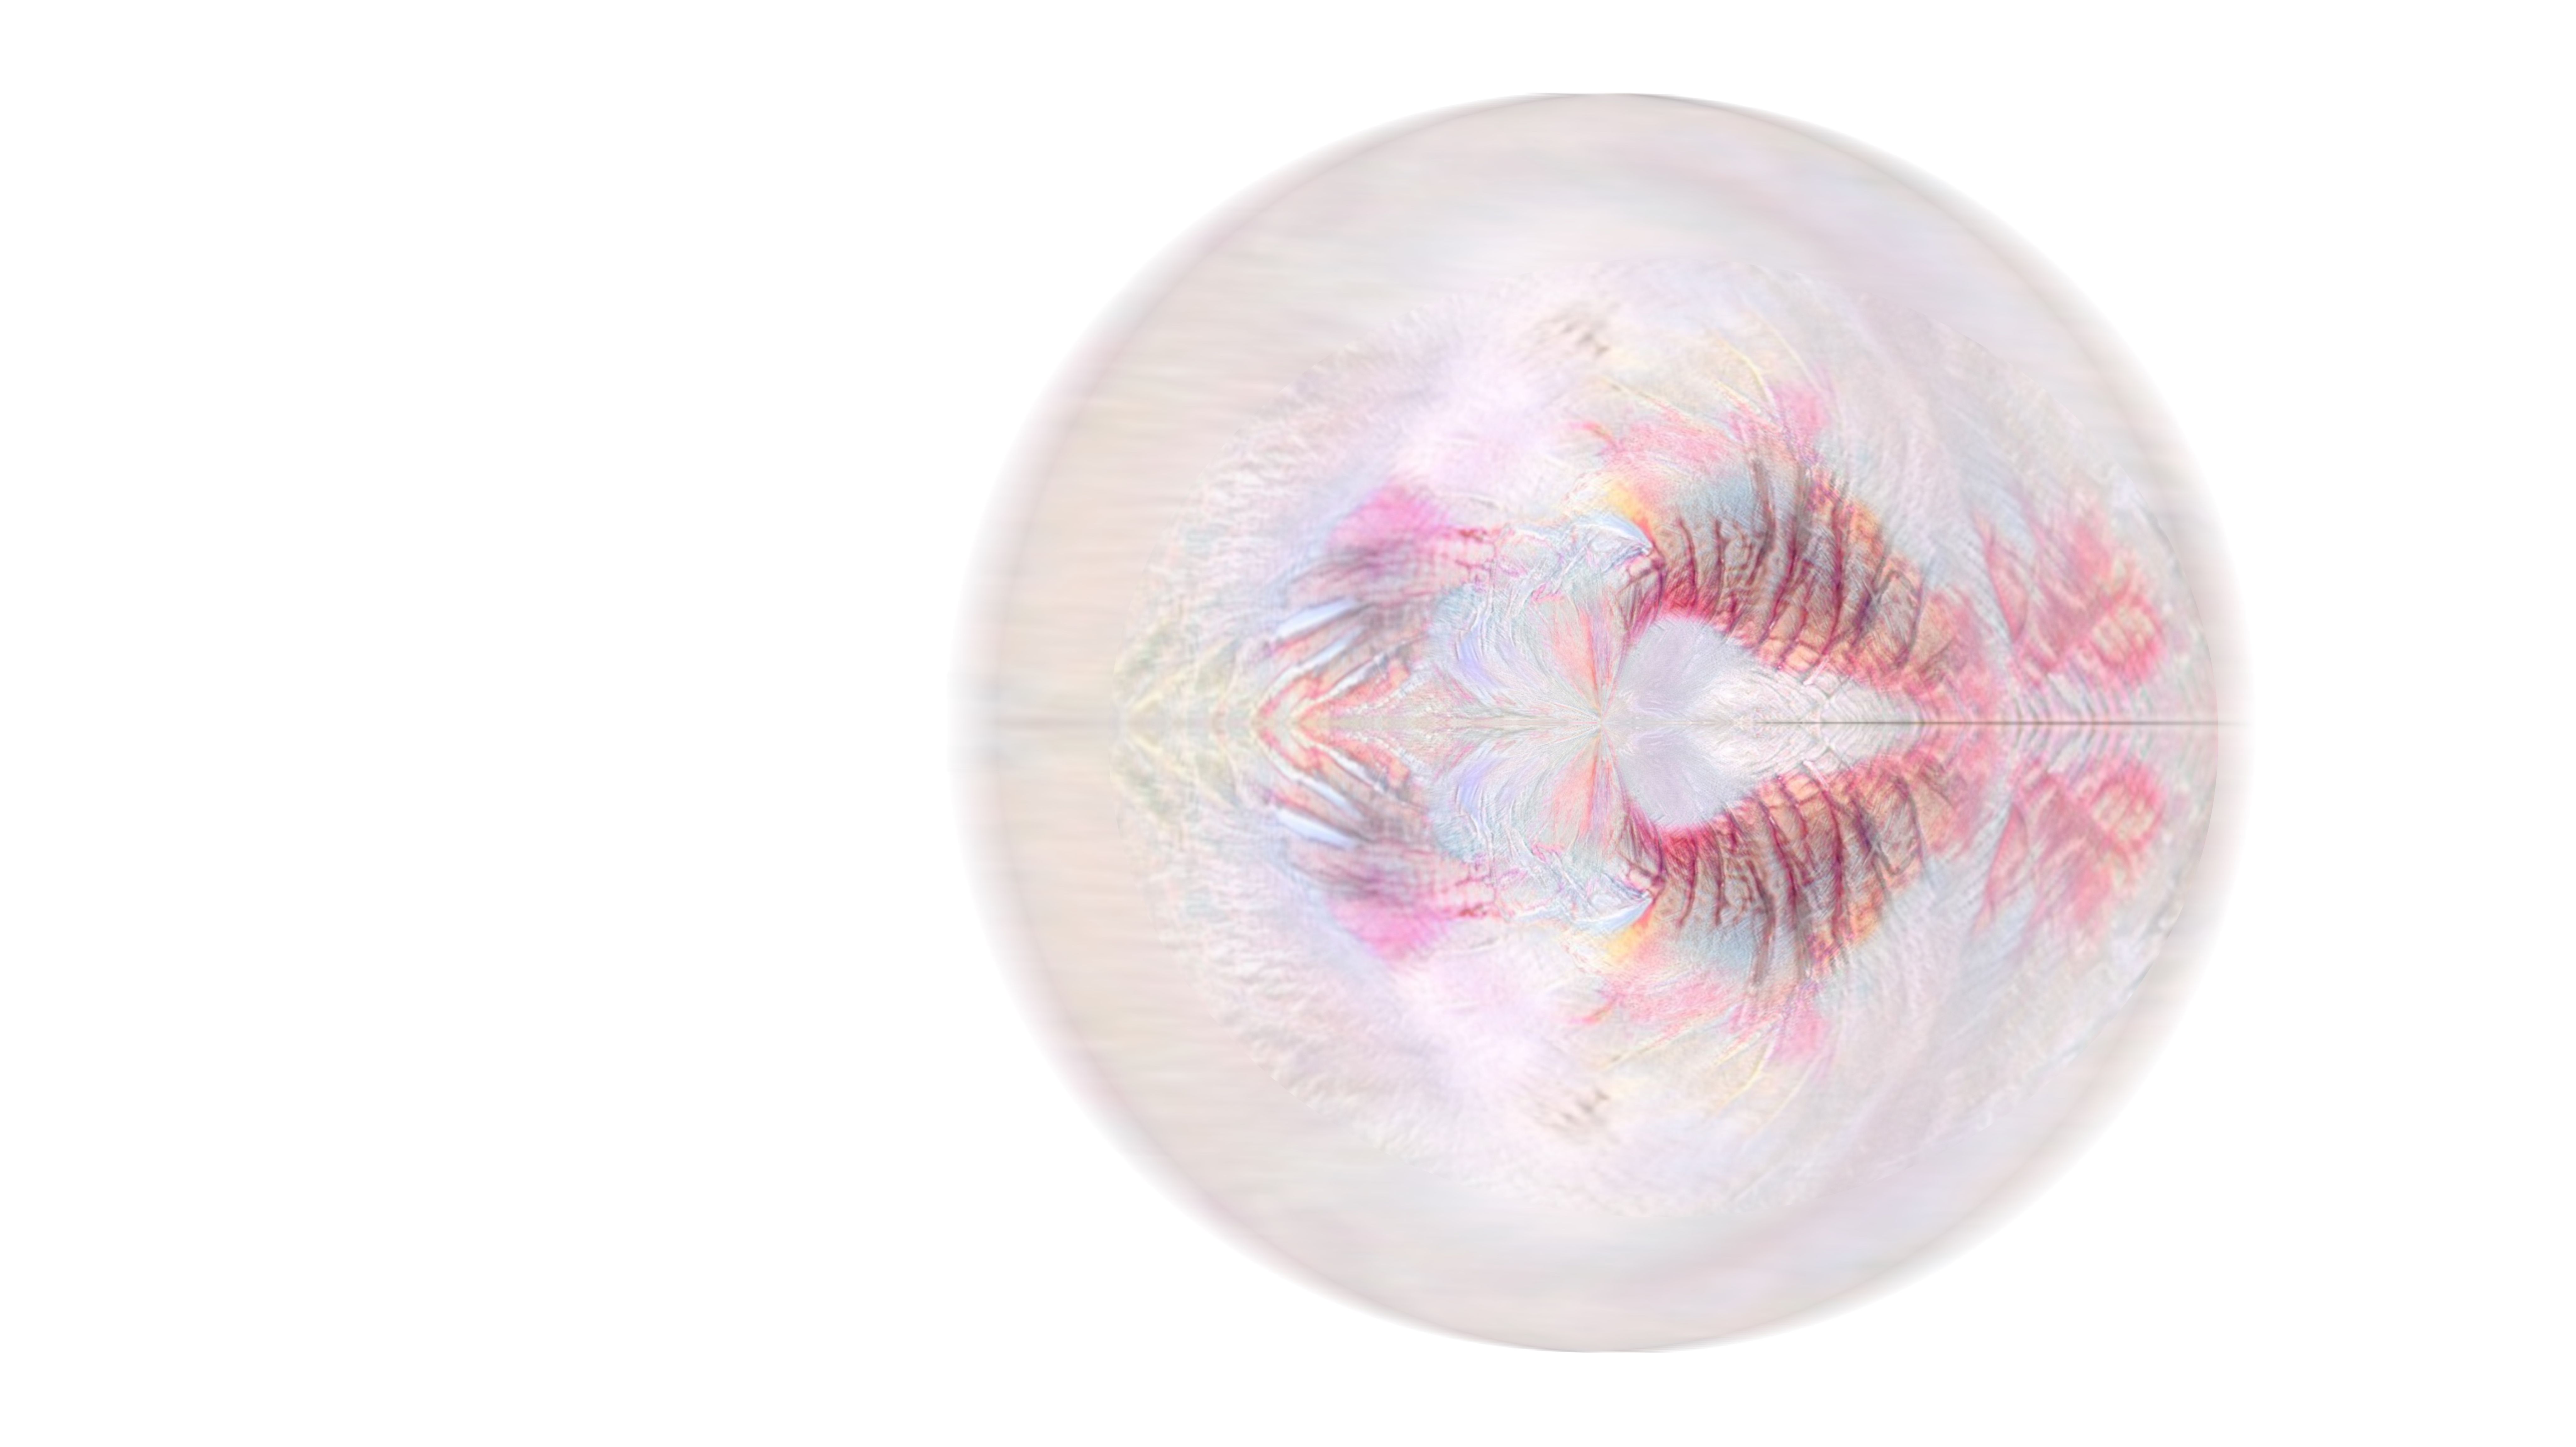 Image of a pearly circular object with soft delicate markings of pink and blue.